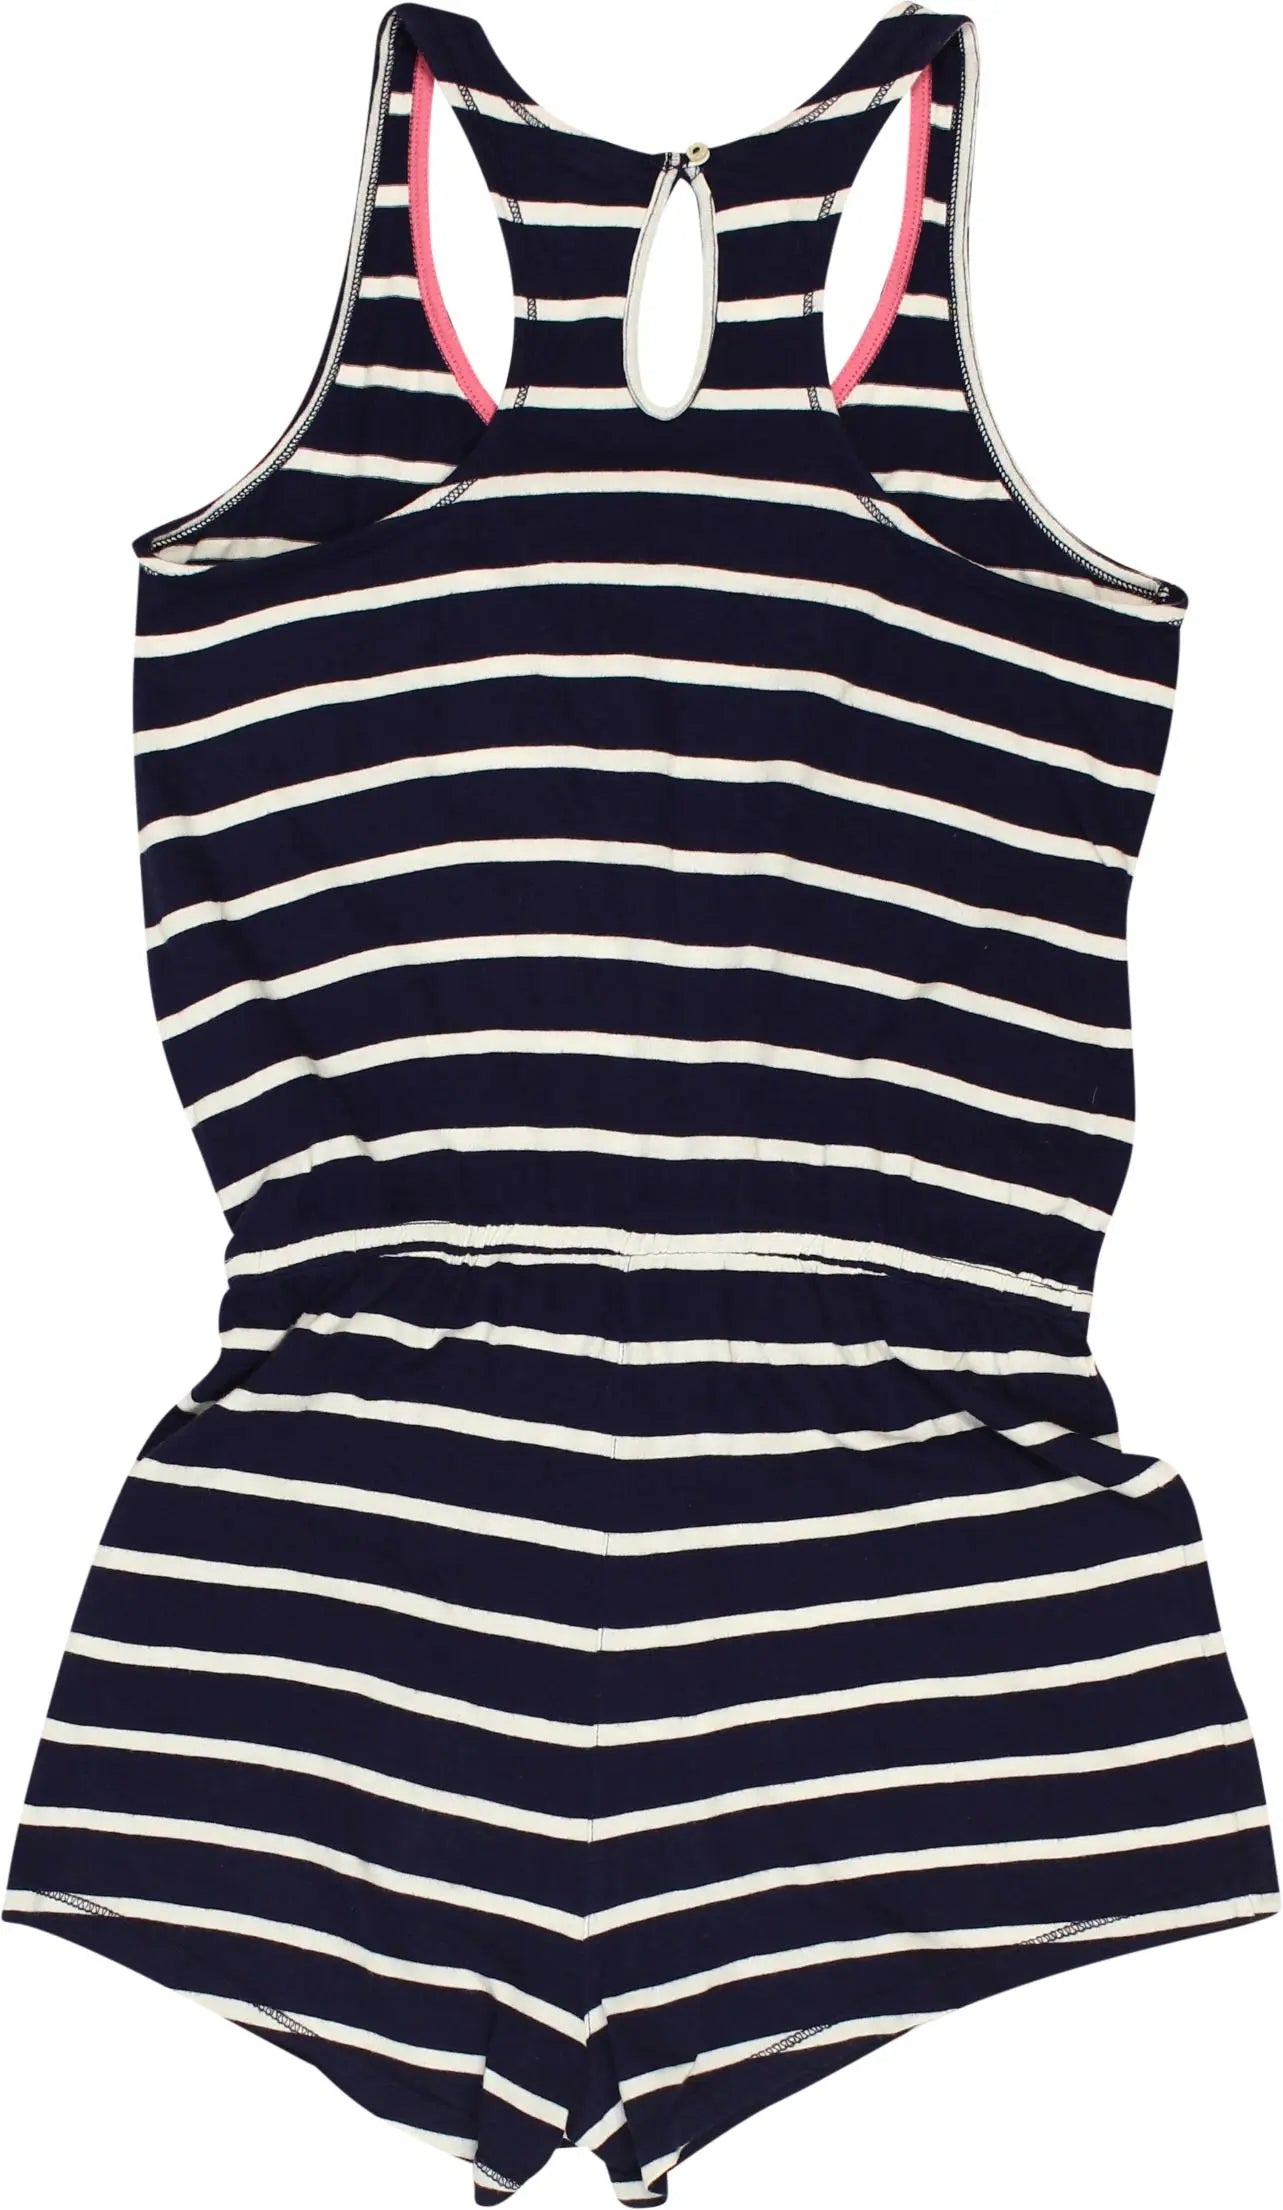 H&M - Striped Playsuit- ThriftTale.com - Vintage and second handclothing